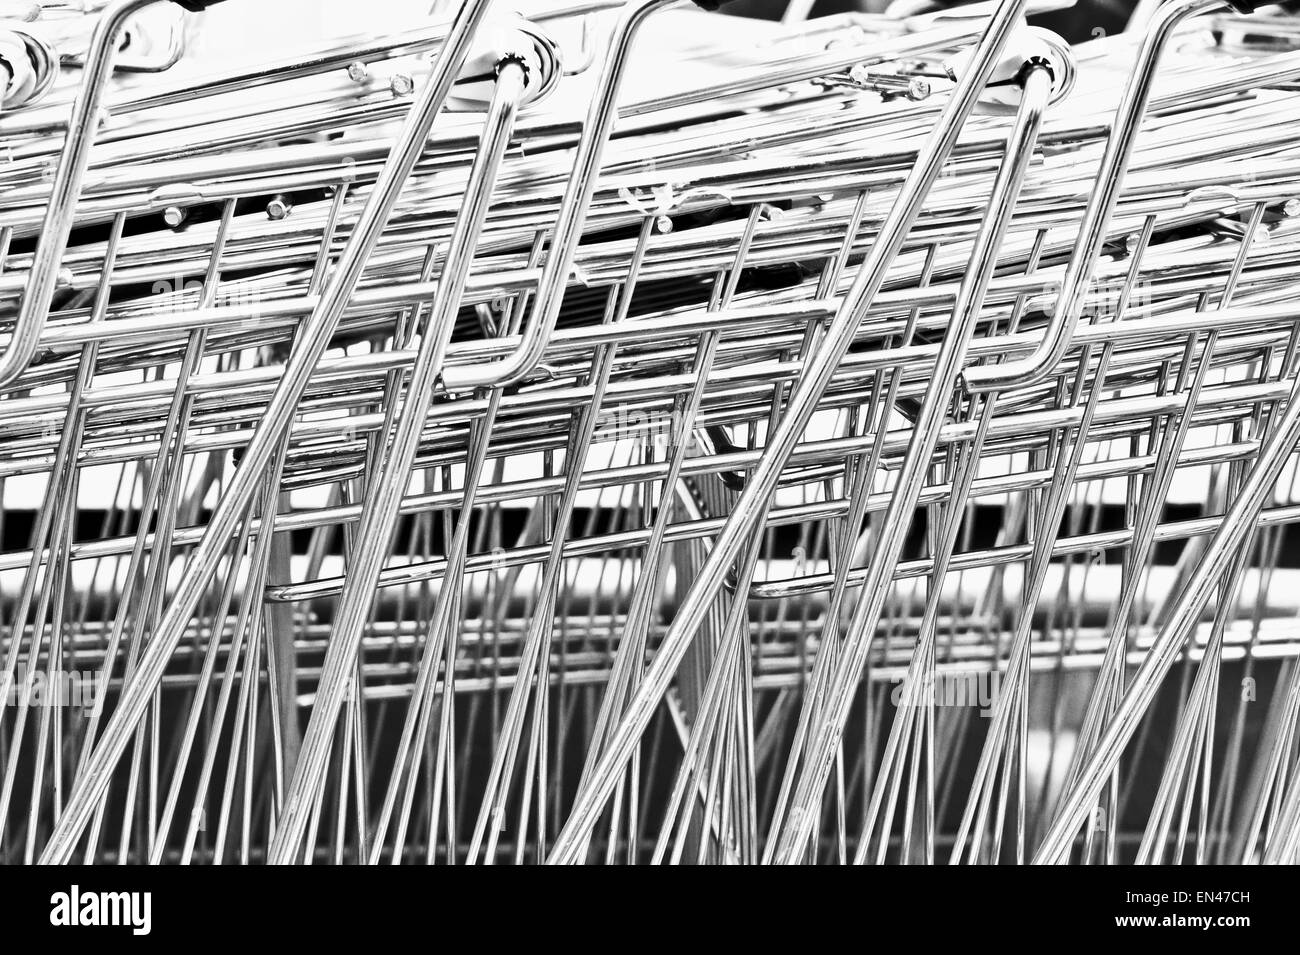 Close up of metal shopping trolleys making an abstract pattern Stock Photo